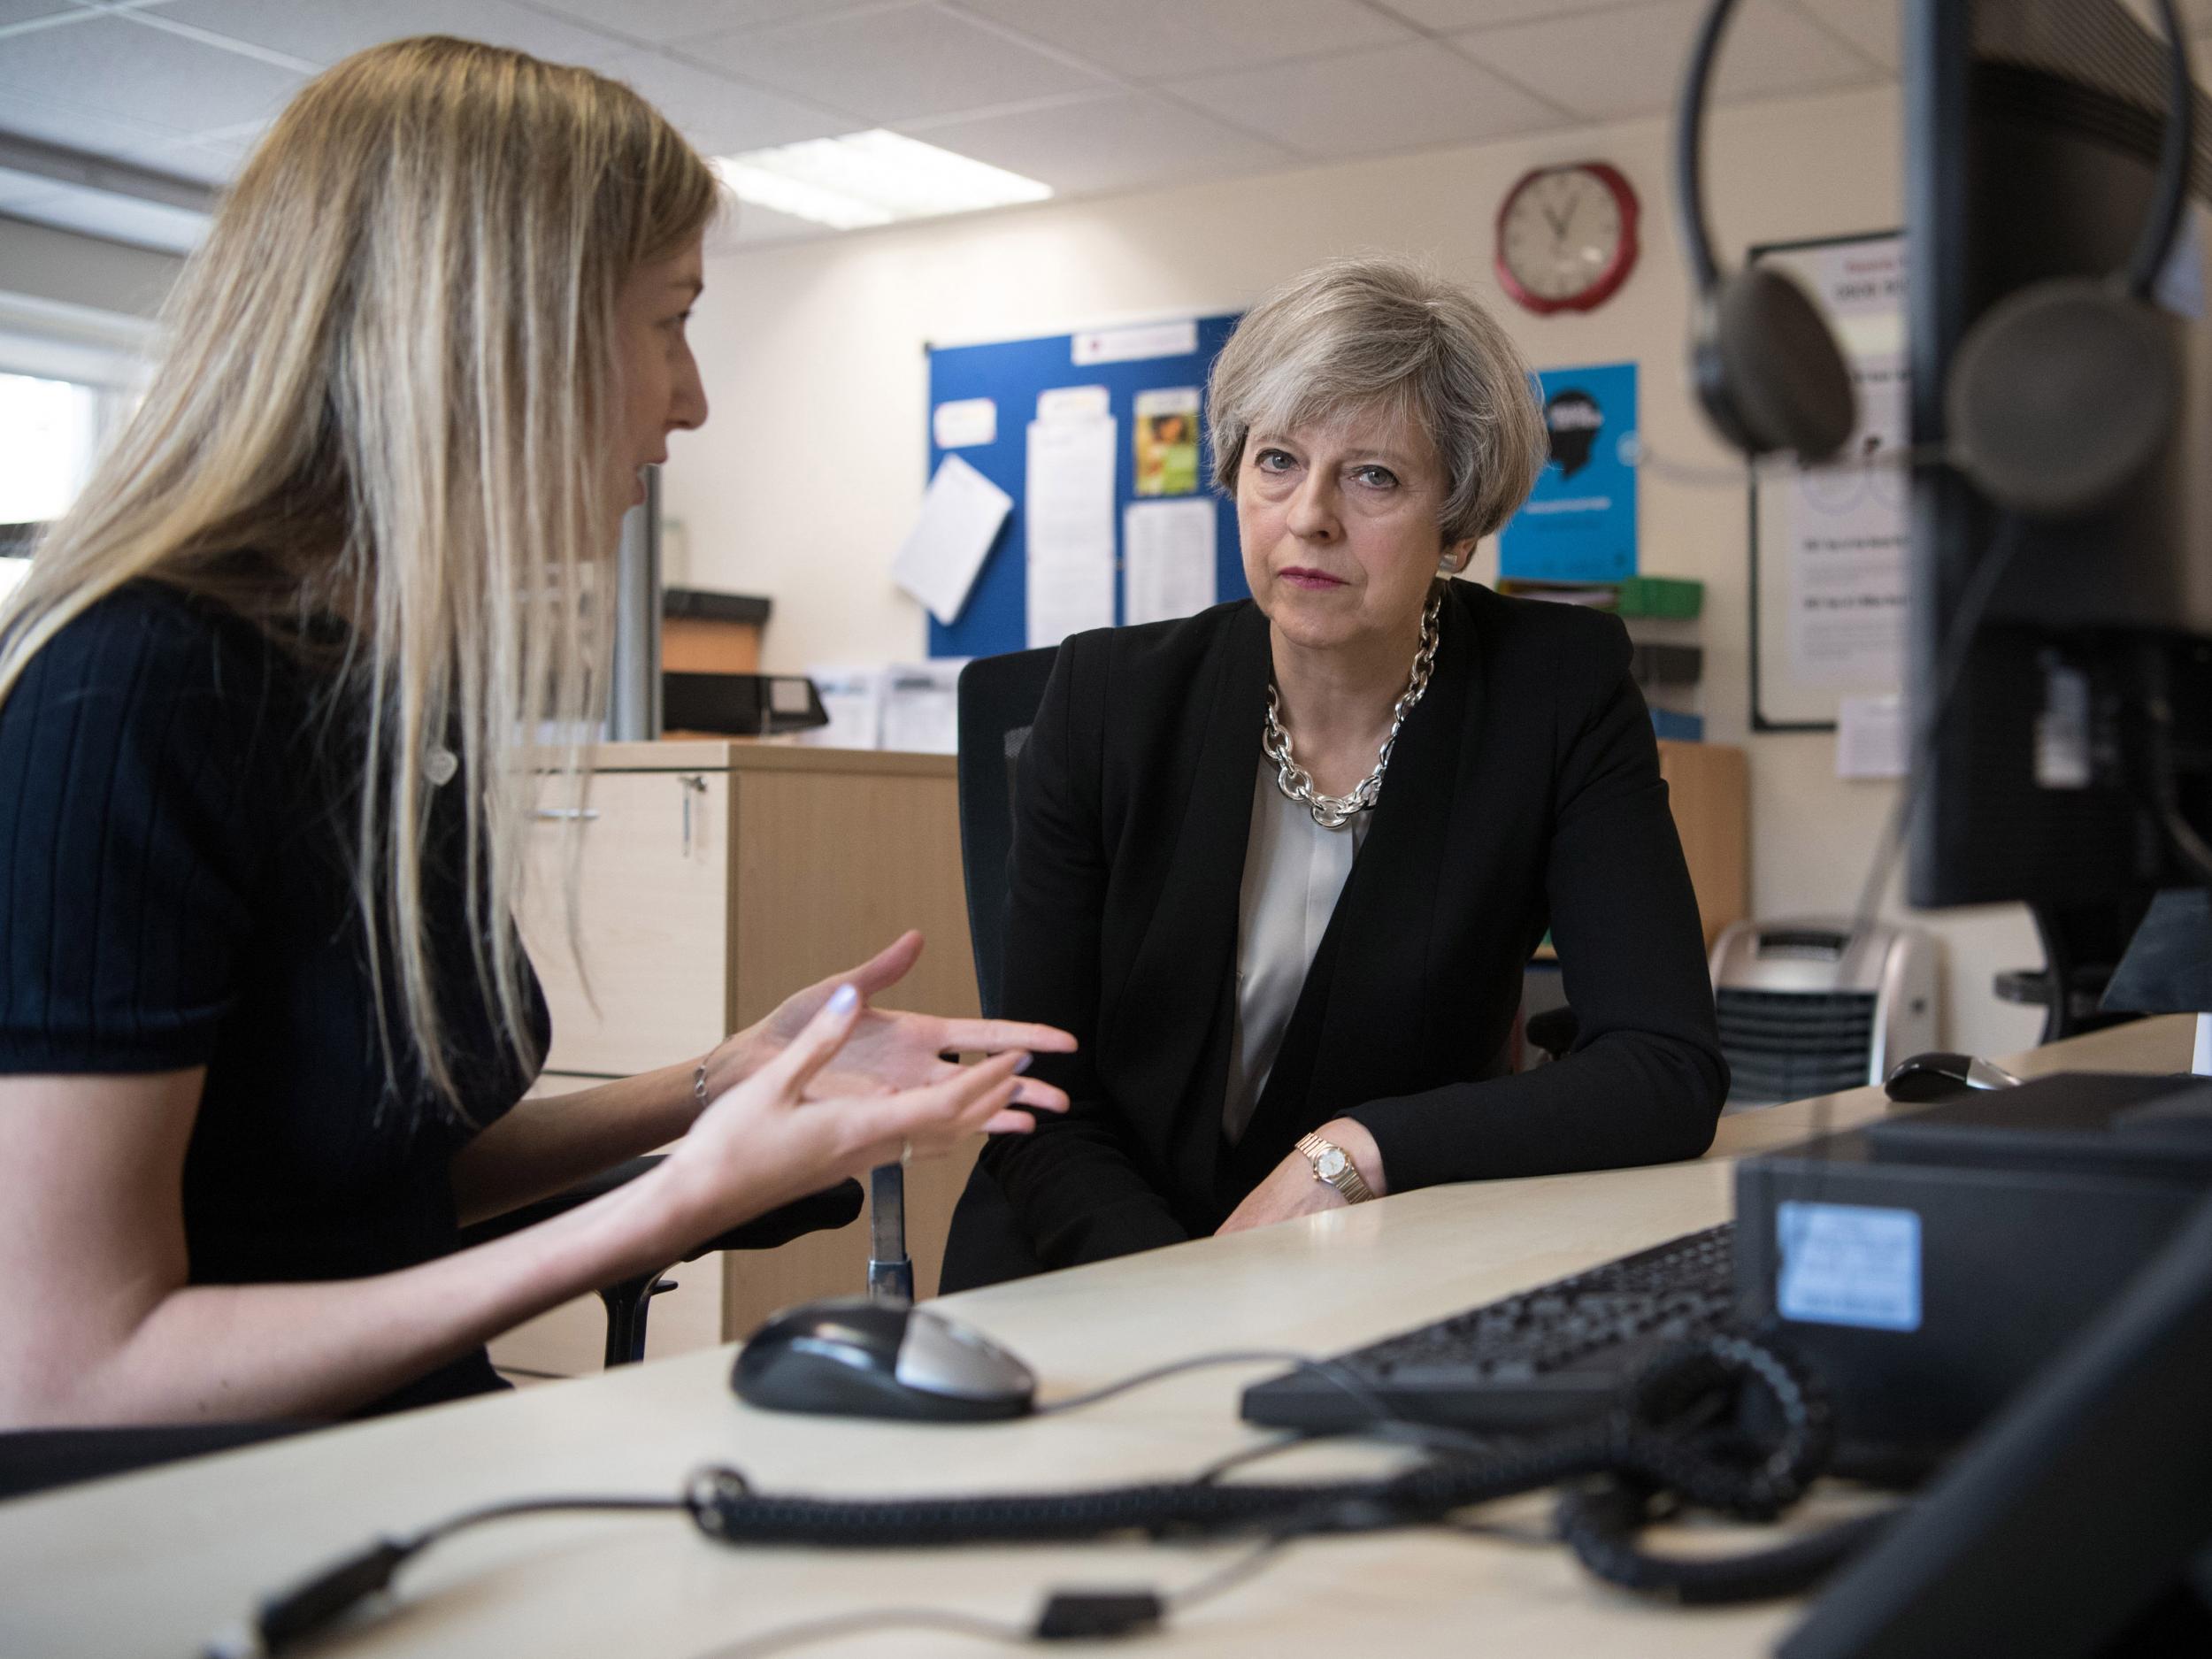 Theresa May spoke to helpline advisers at Young Minds to get to the bottom of the mental health crisis, but missed a crucial point